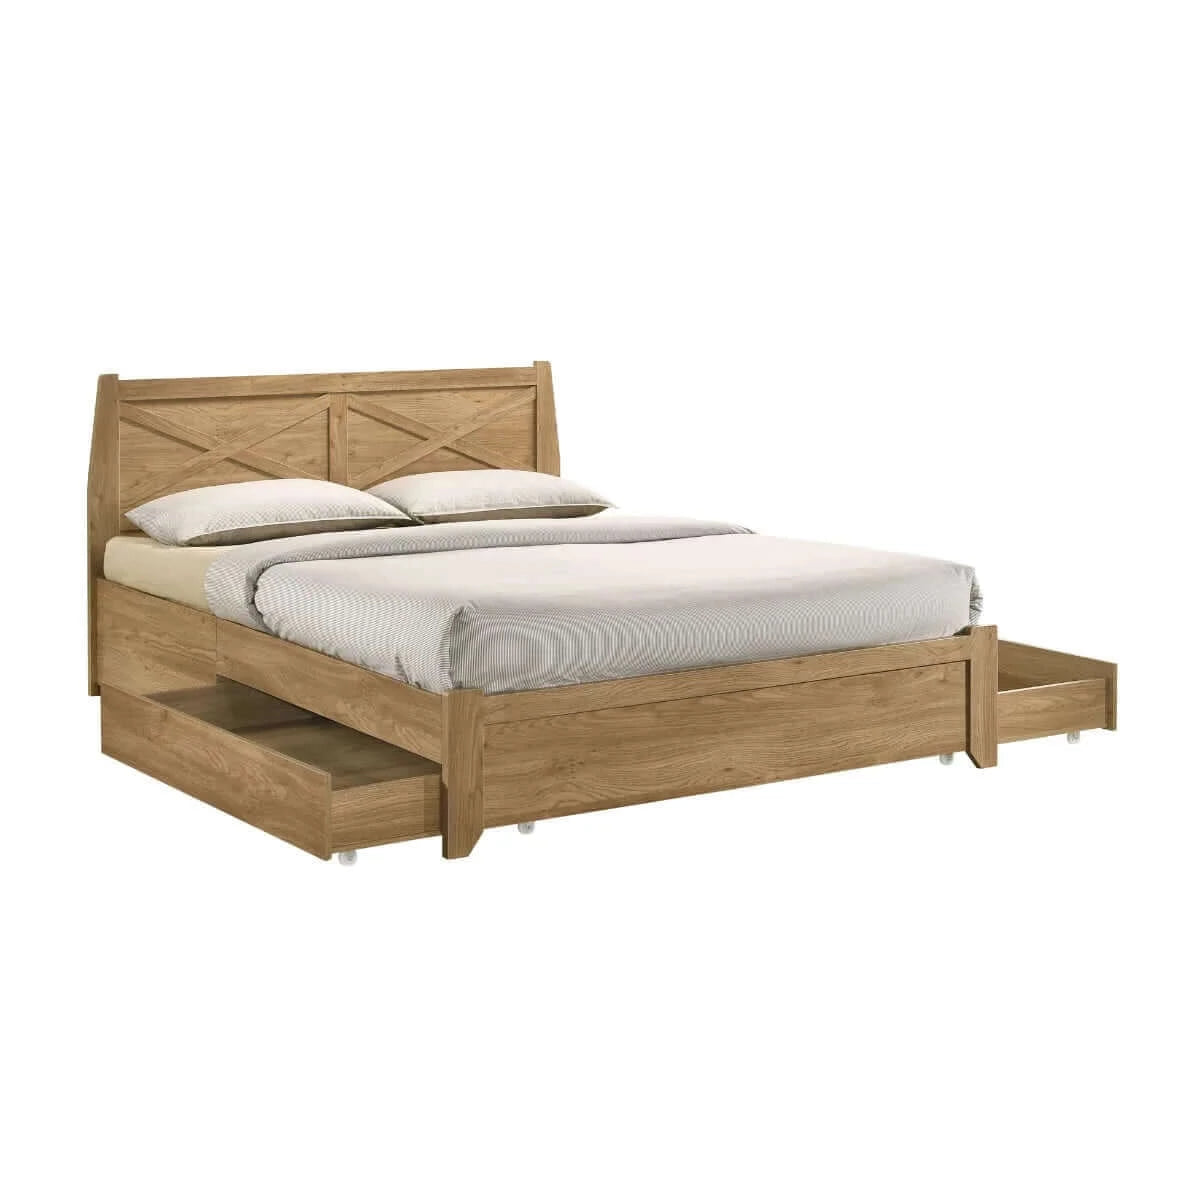 Buy mica natural wooden bed frame with storage drawers queen - upinteriors-Upinteriors